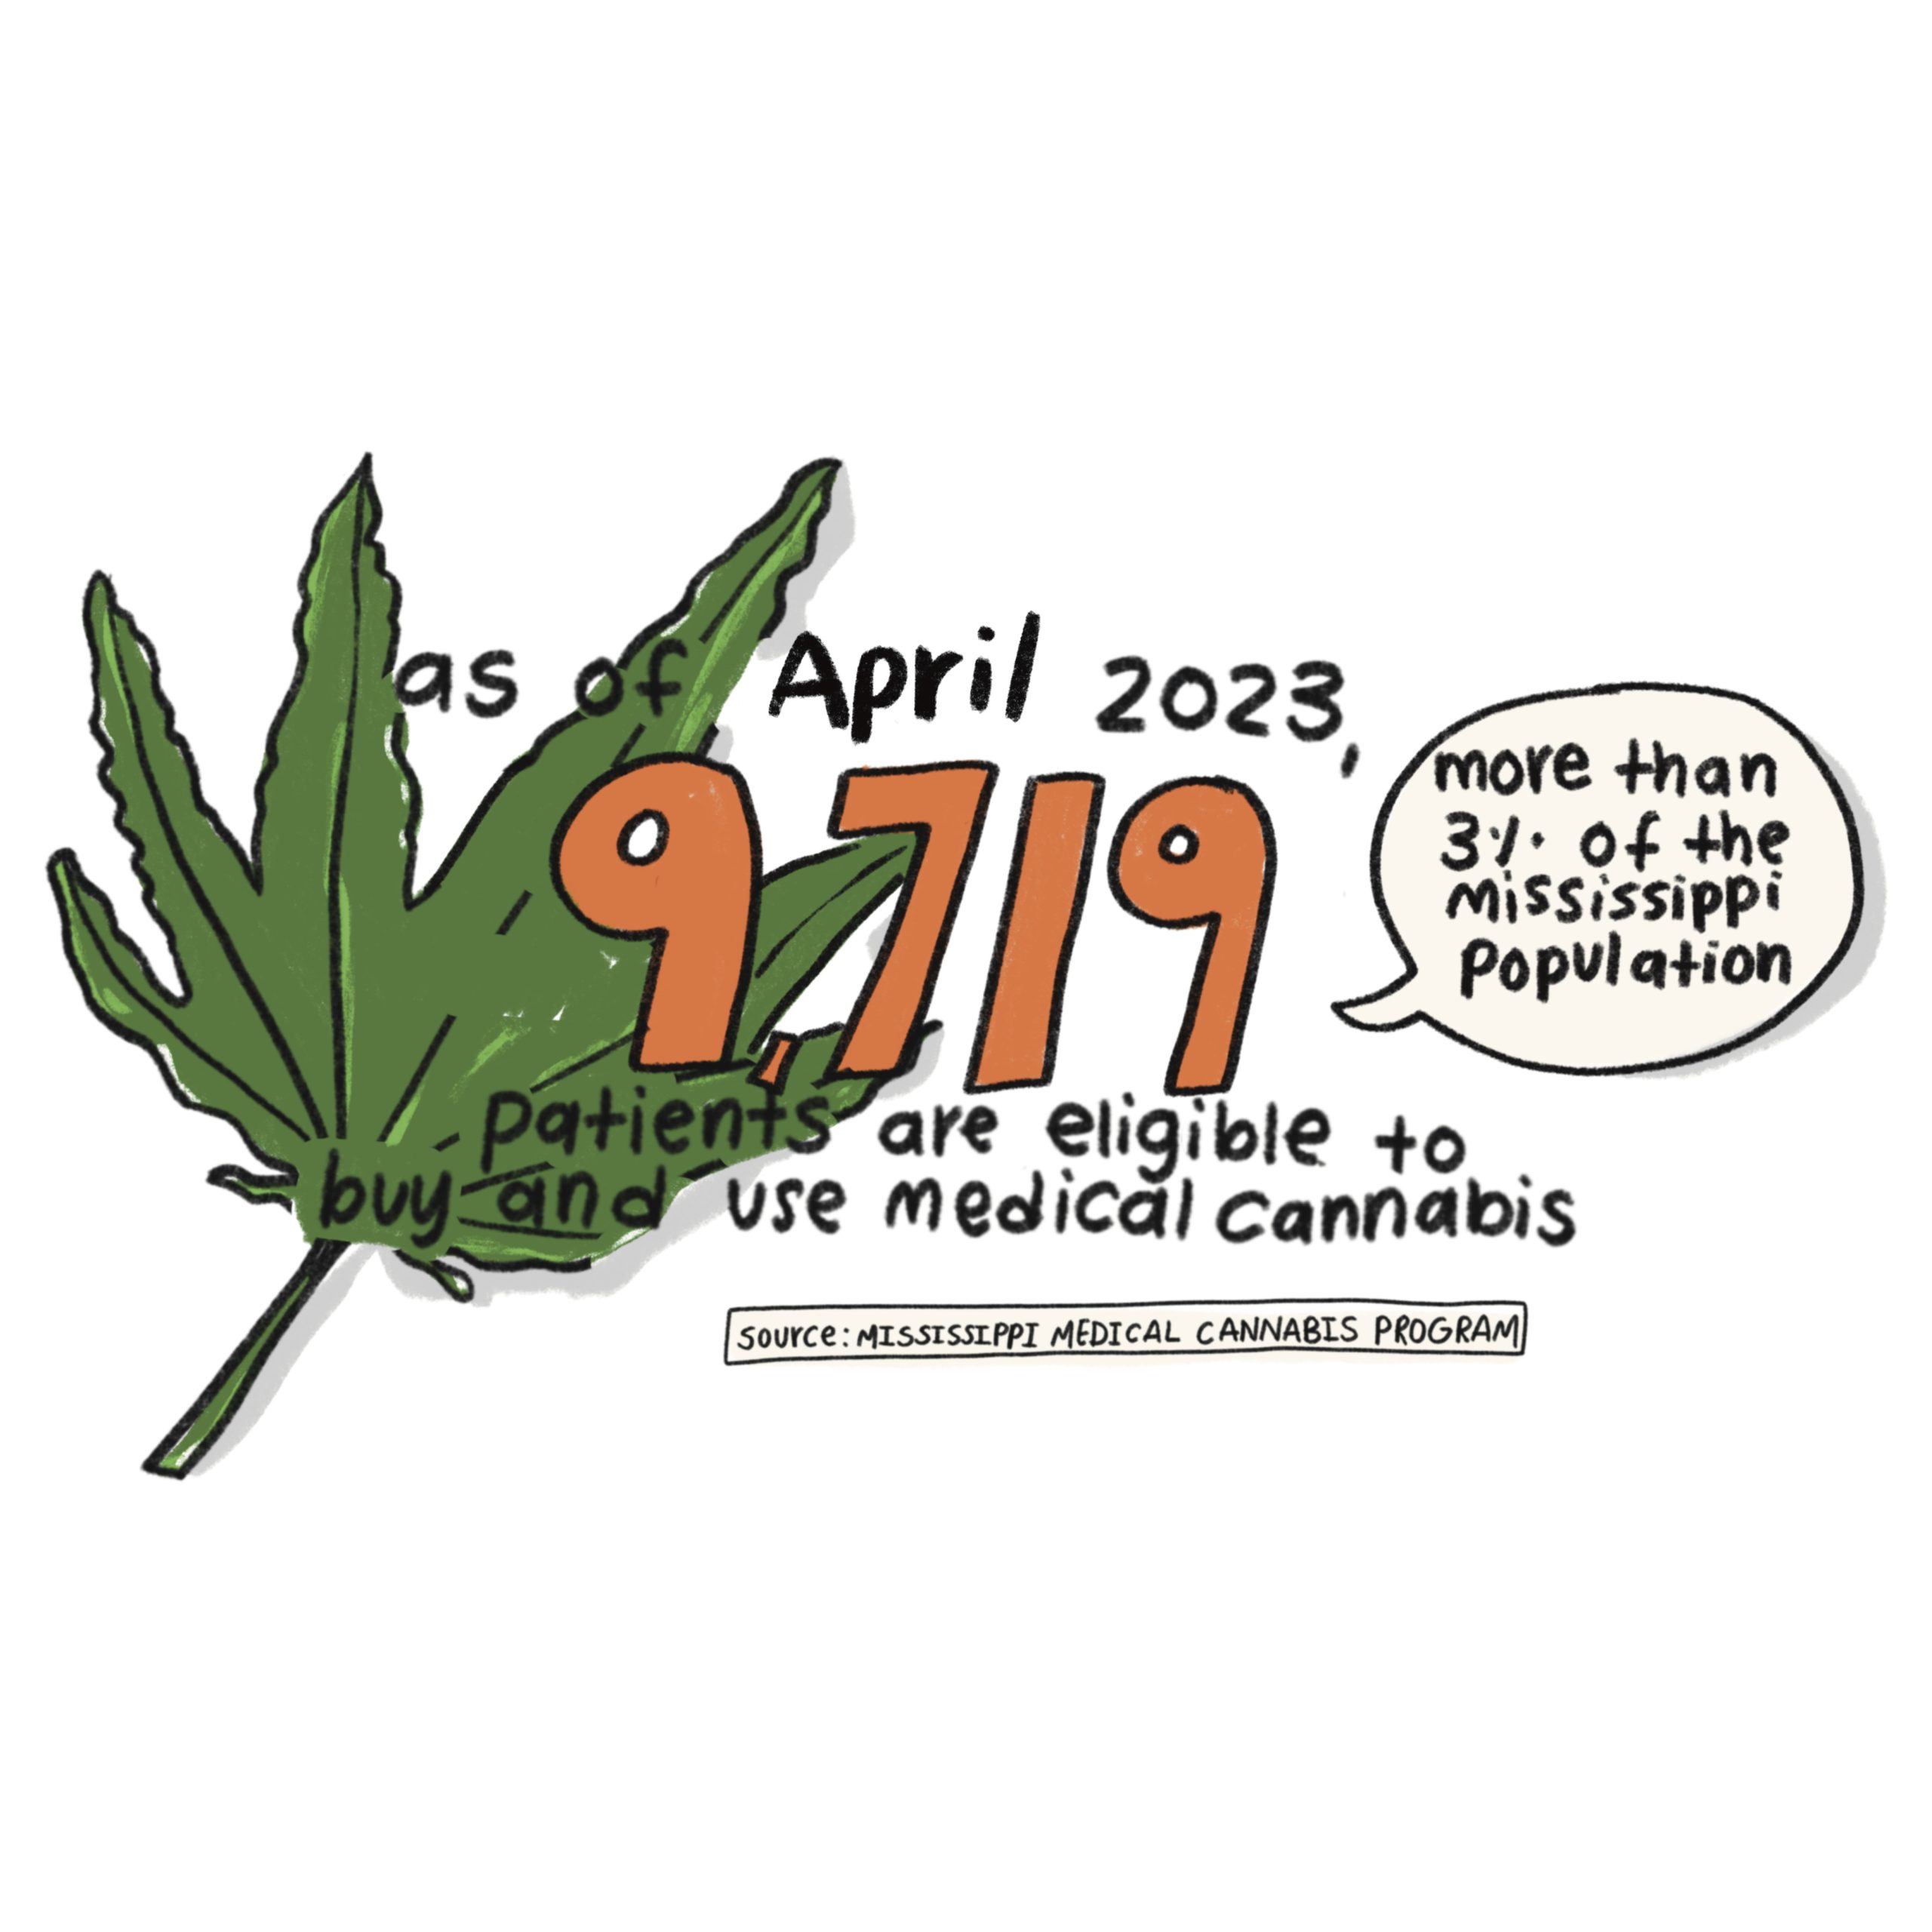 As of April 2023, 9,719 patients are eligible to buy and use medical cannabis. Source: Mississippi Medical Cannabis Program. 